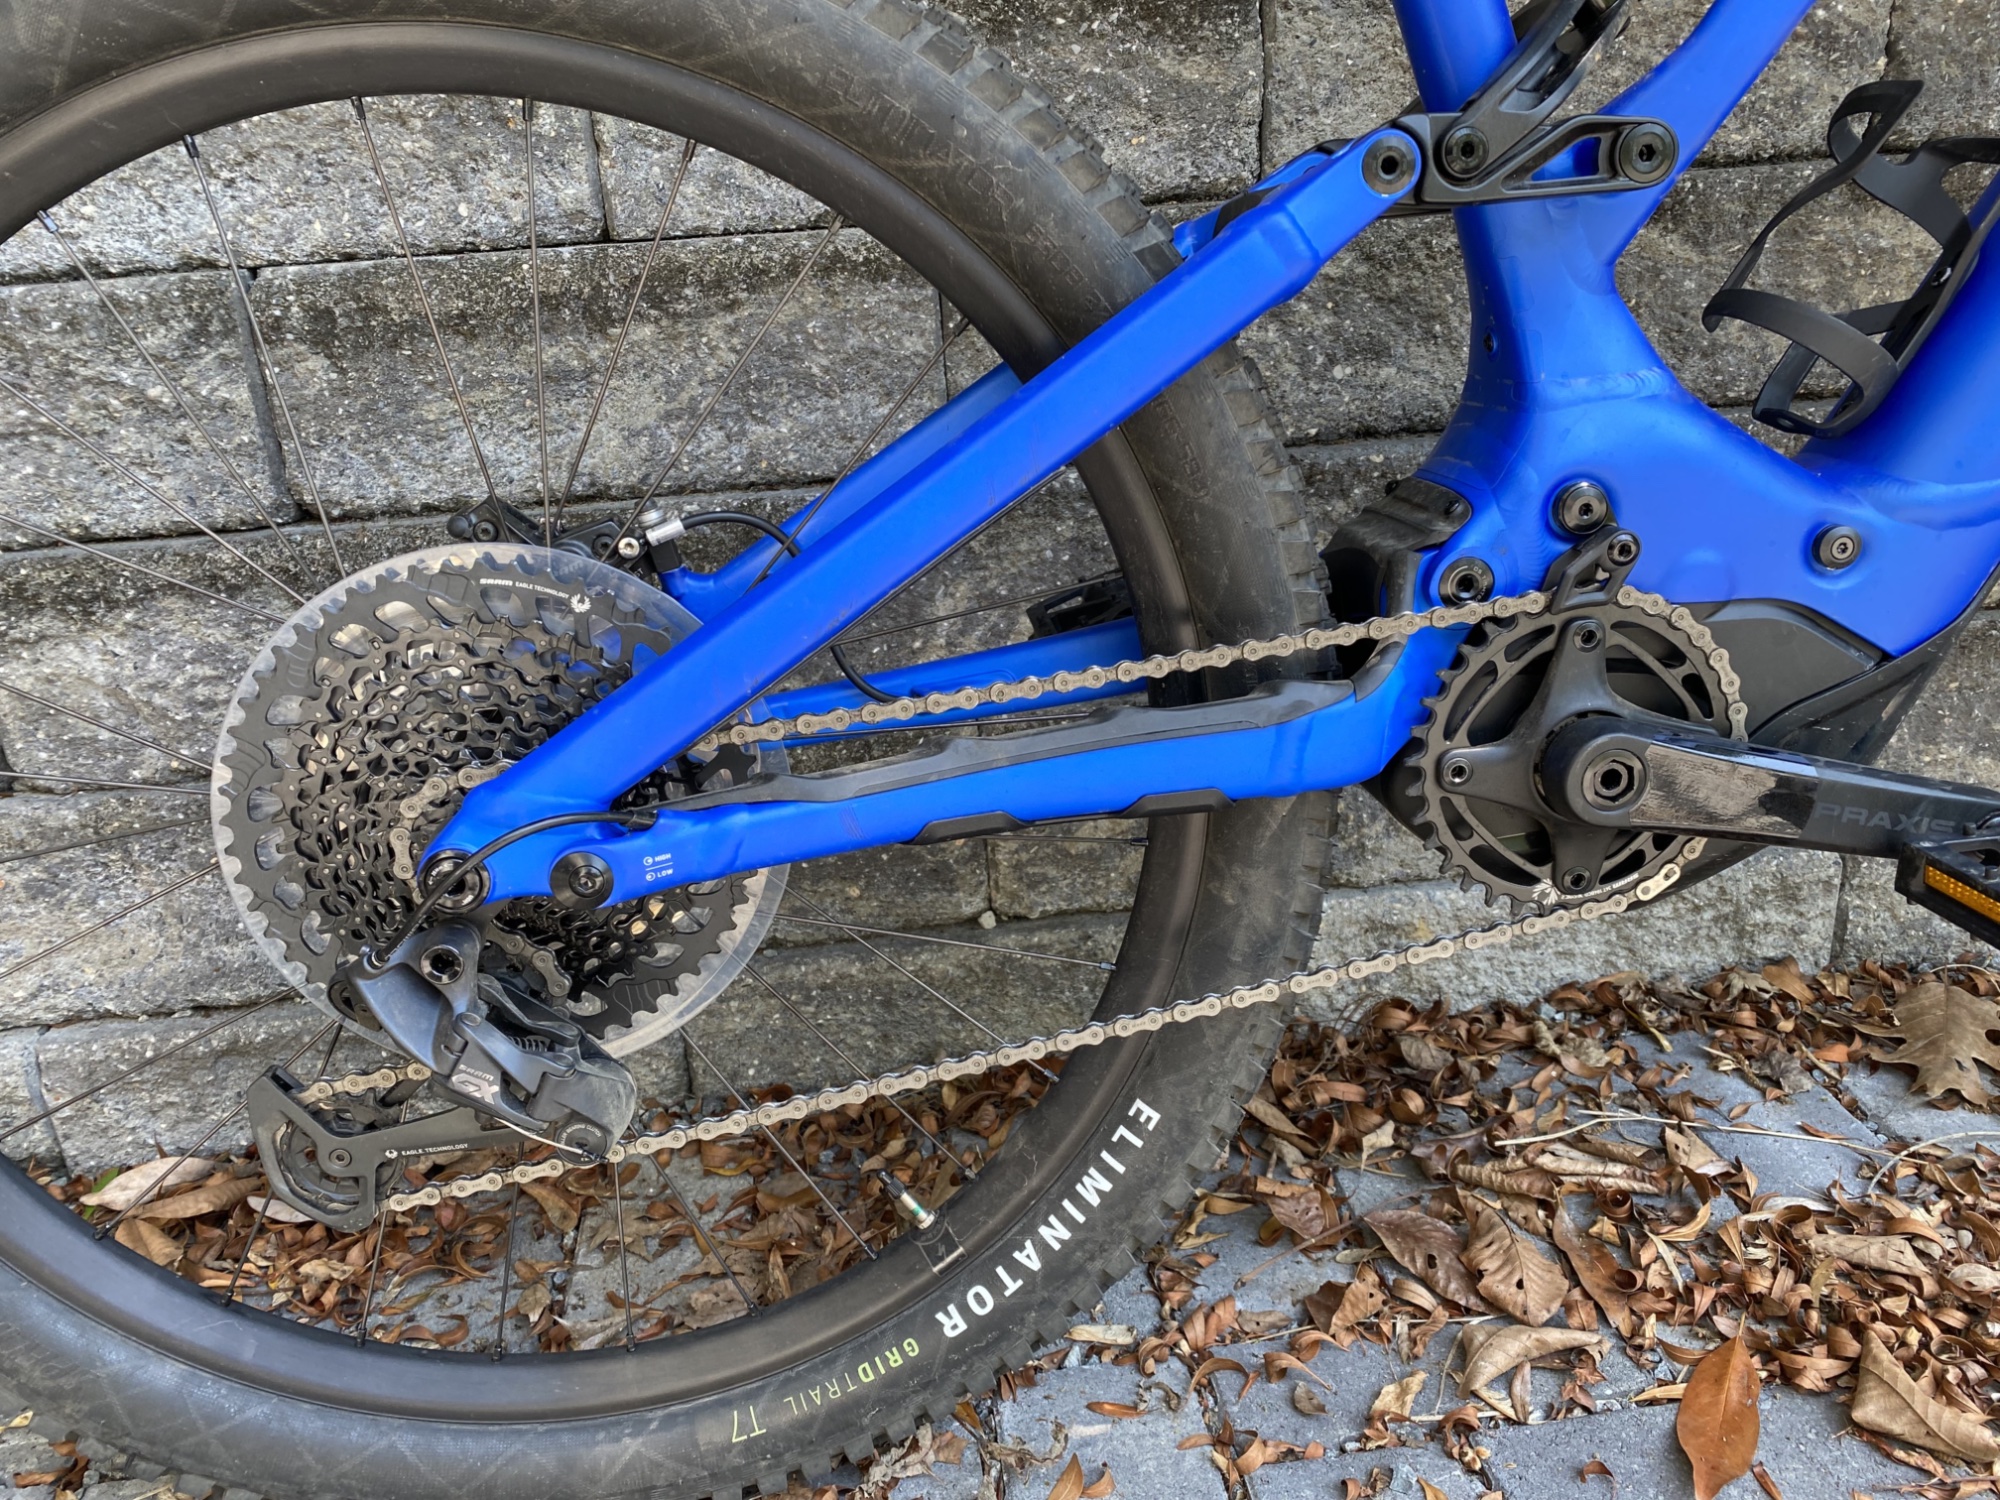 Lots of moving parts: The rear wheel is on an assembly that pivots, with the jarring of bumps cushioned by a shock absorber. The engineering and parts involved add to the price of mountain bikes.